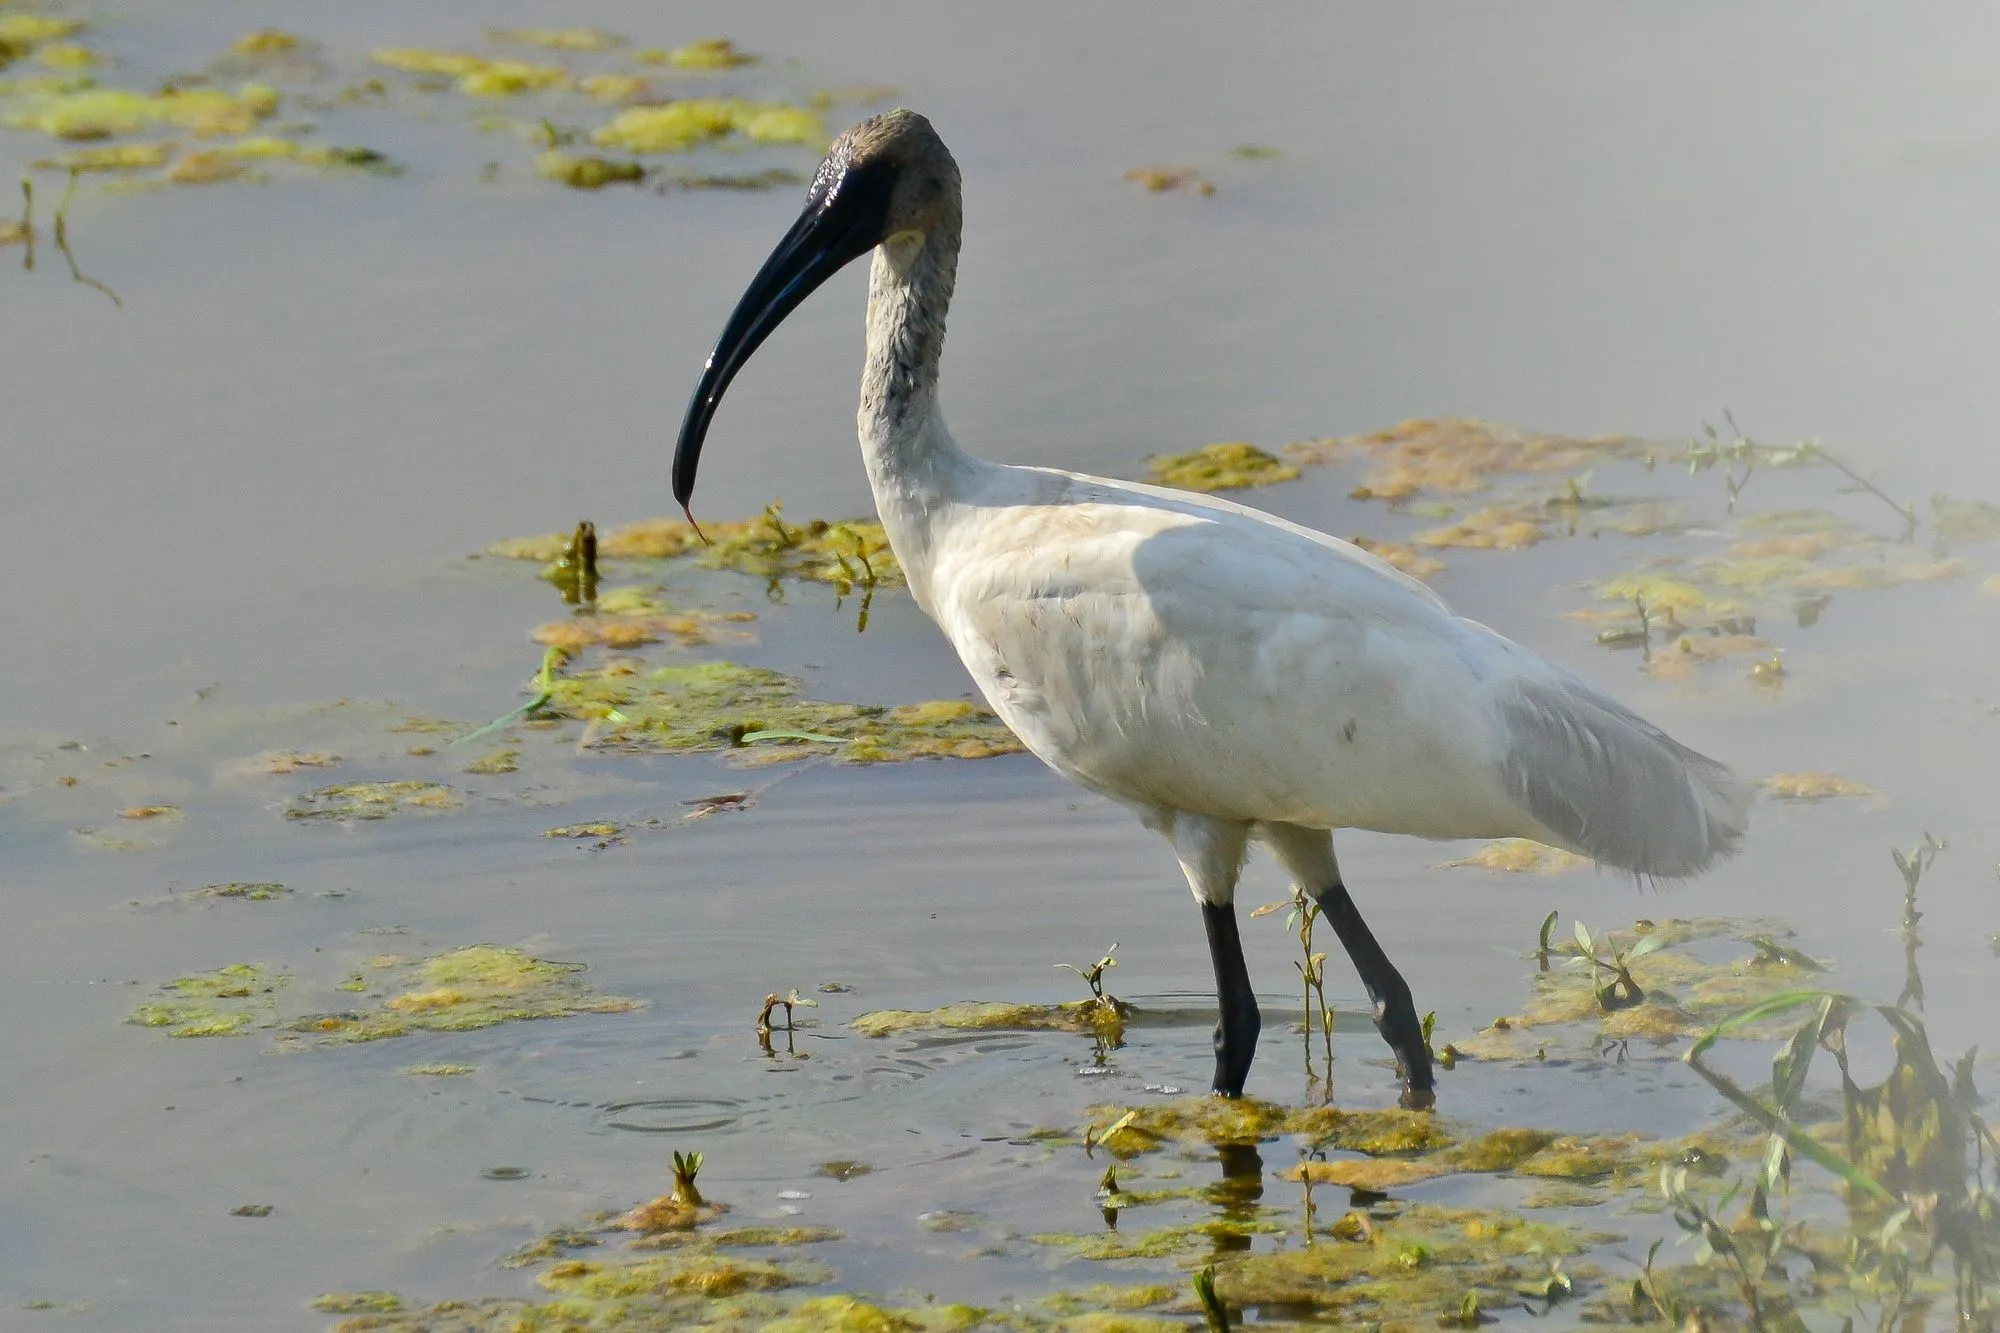 A poised black-headed ibis with a black neck and head.